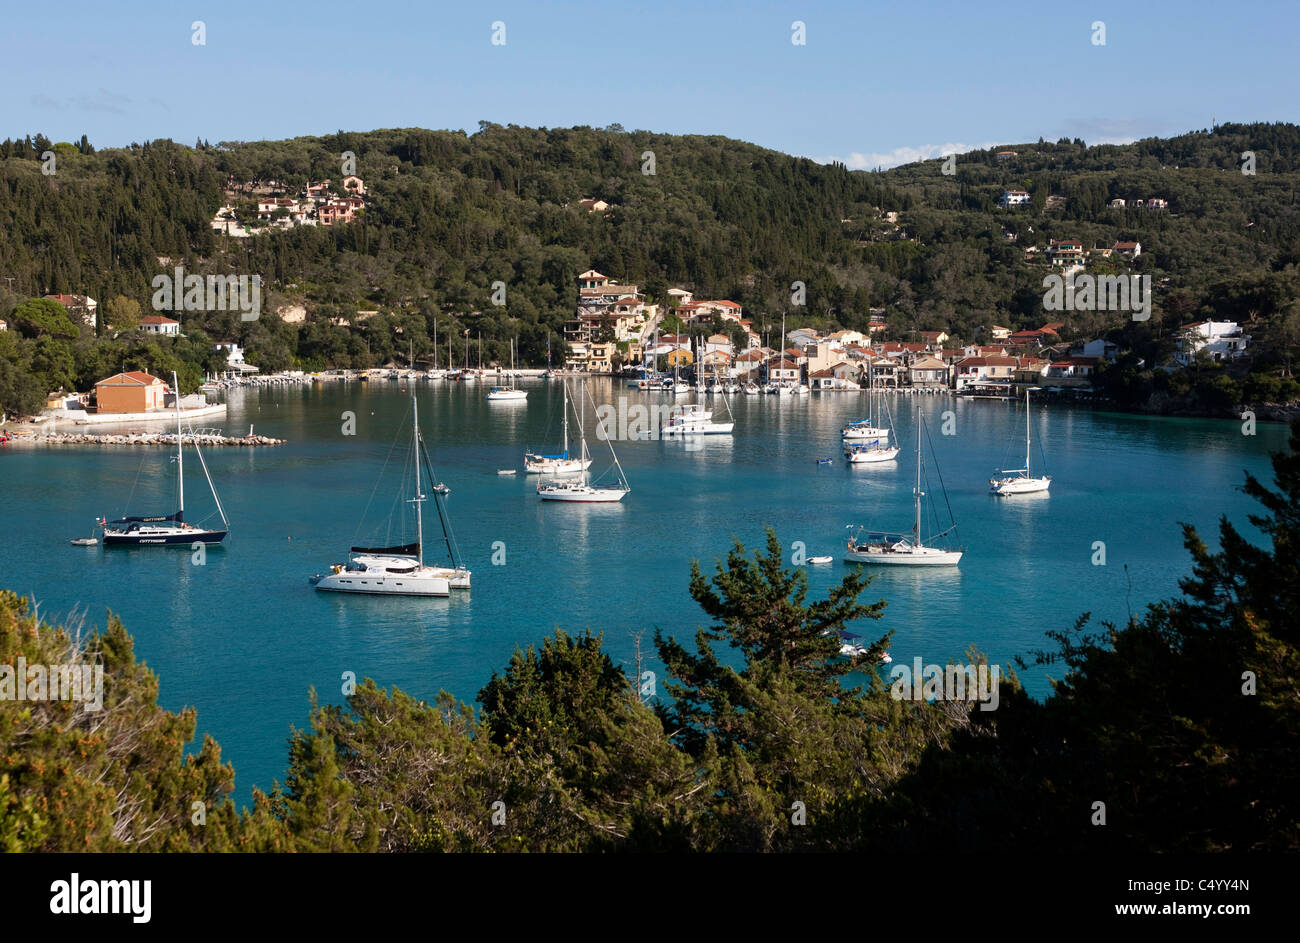 The peaceful and sheltered Lakka harbour. Paxos, Greece. Stock Photo